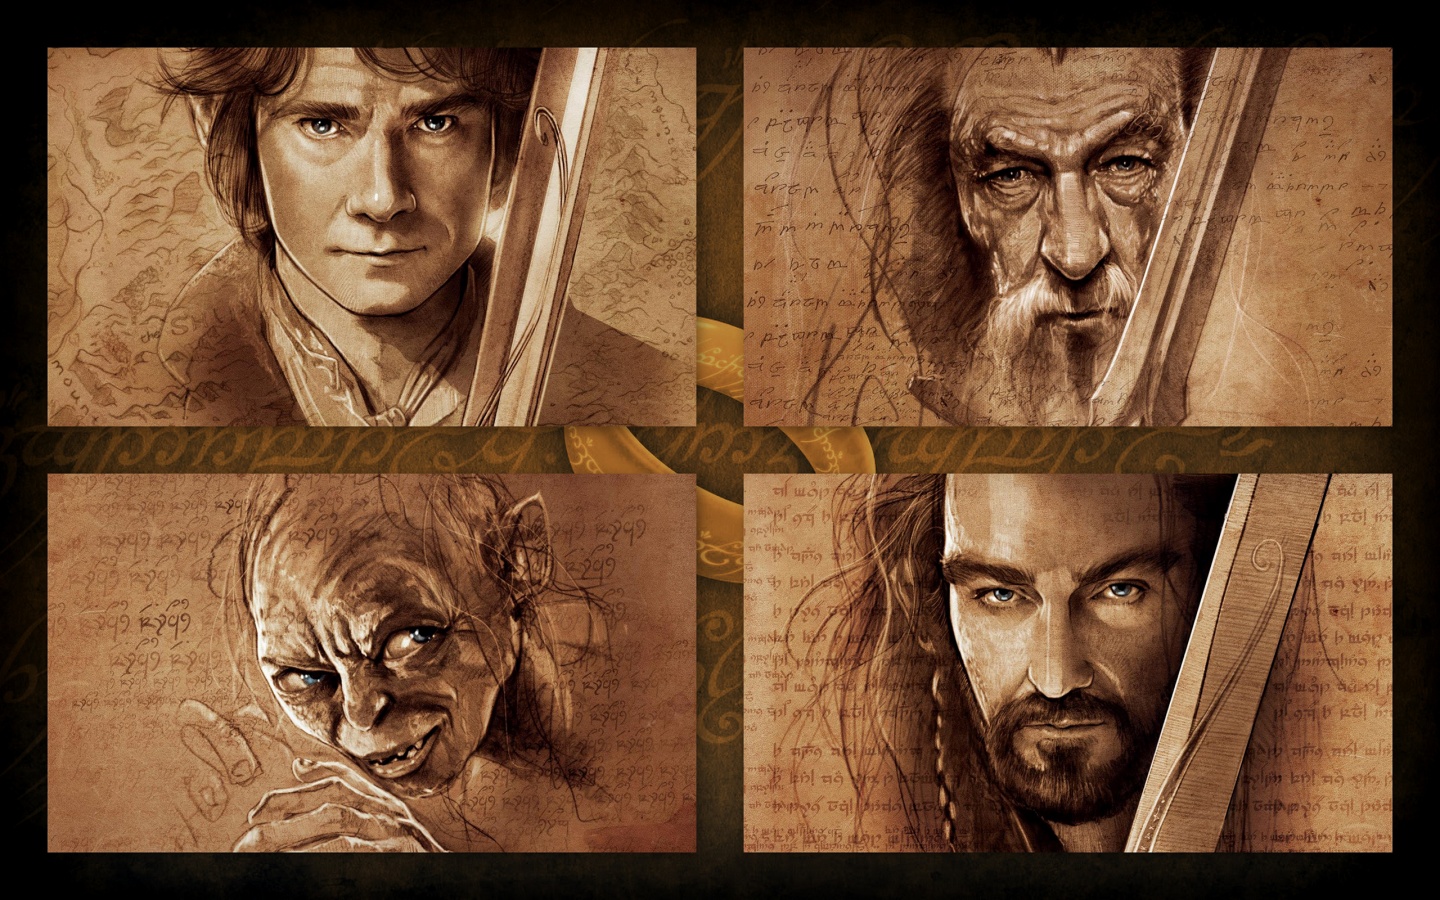 The Hobbit - Chapters 1-2-3 by P-JoArt on DeviantArt